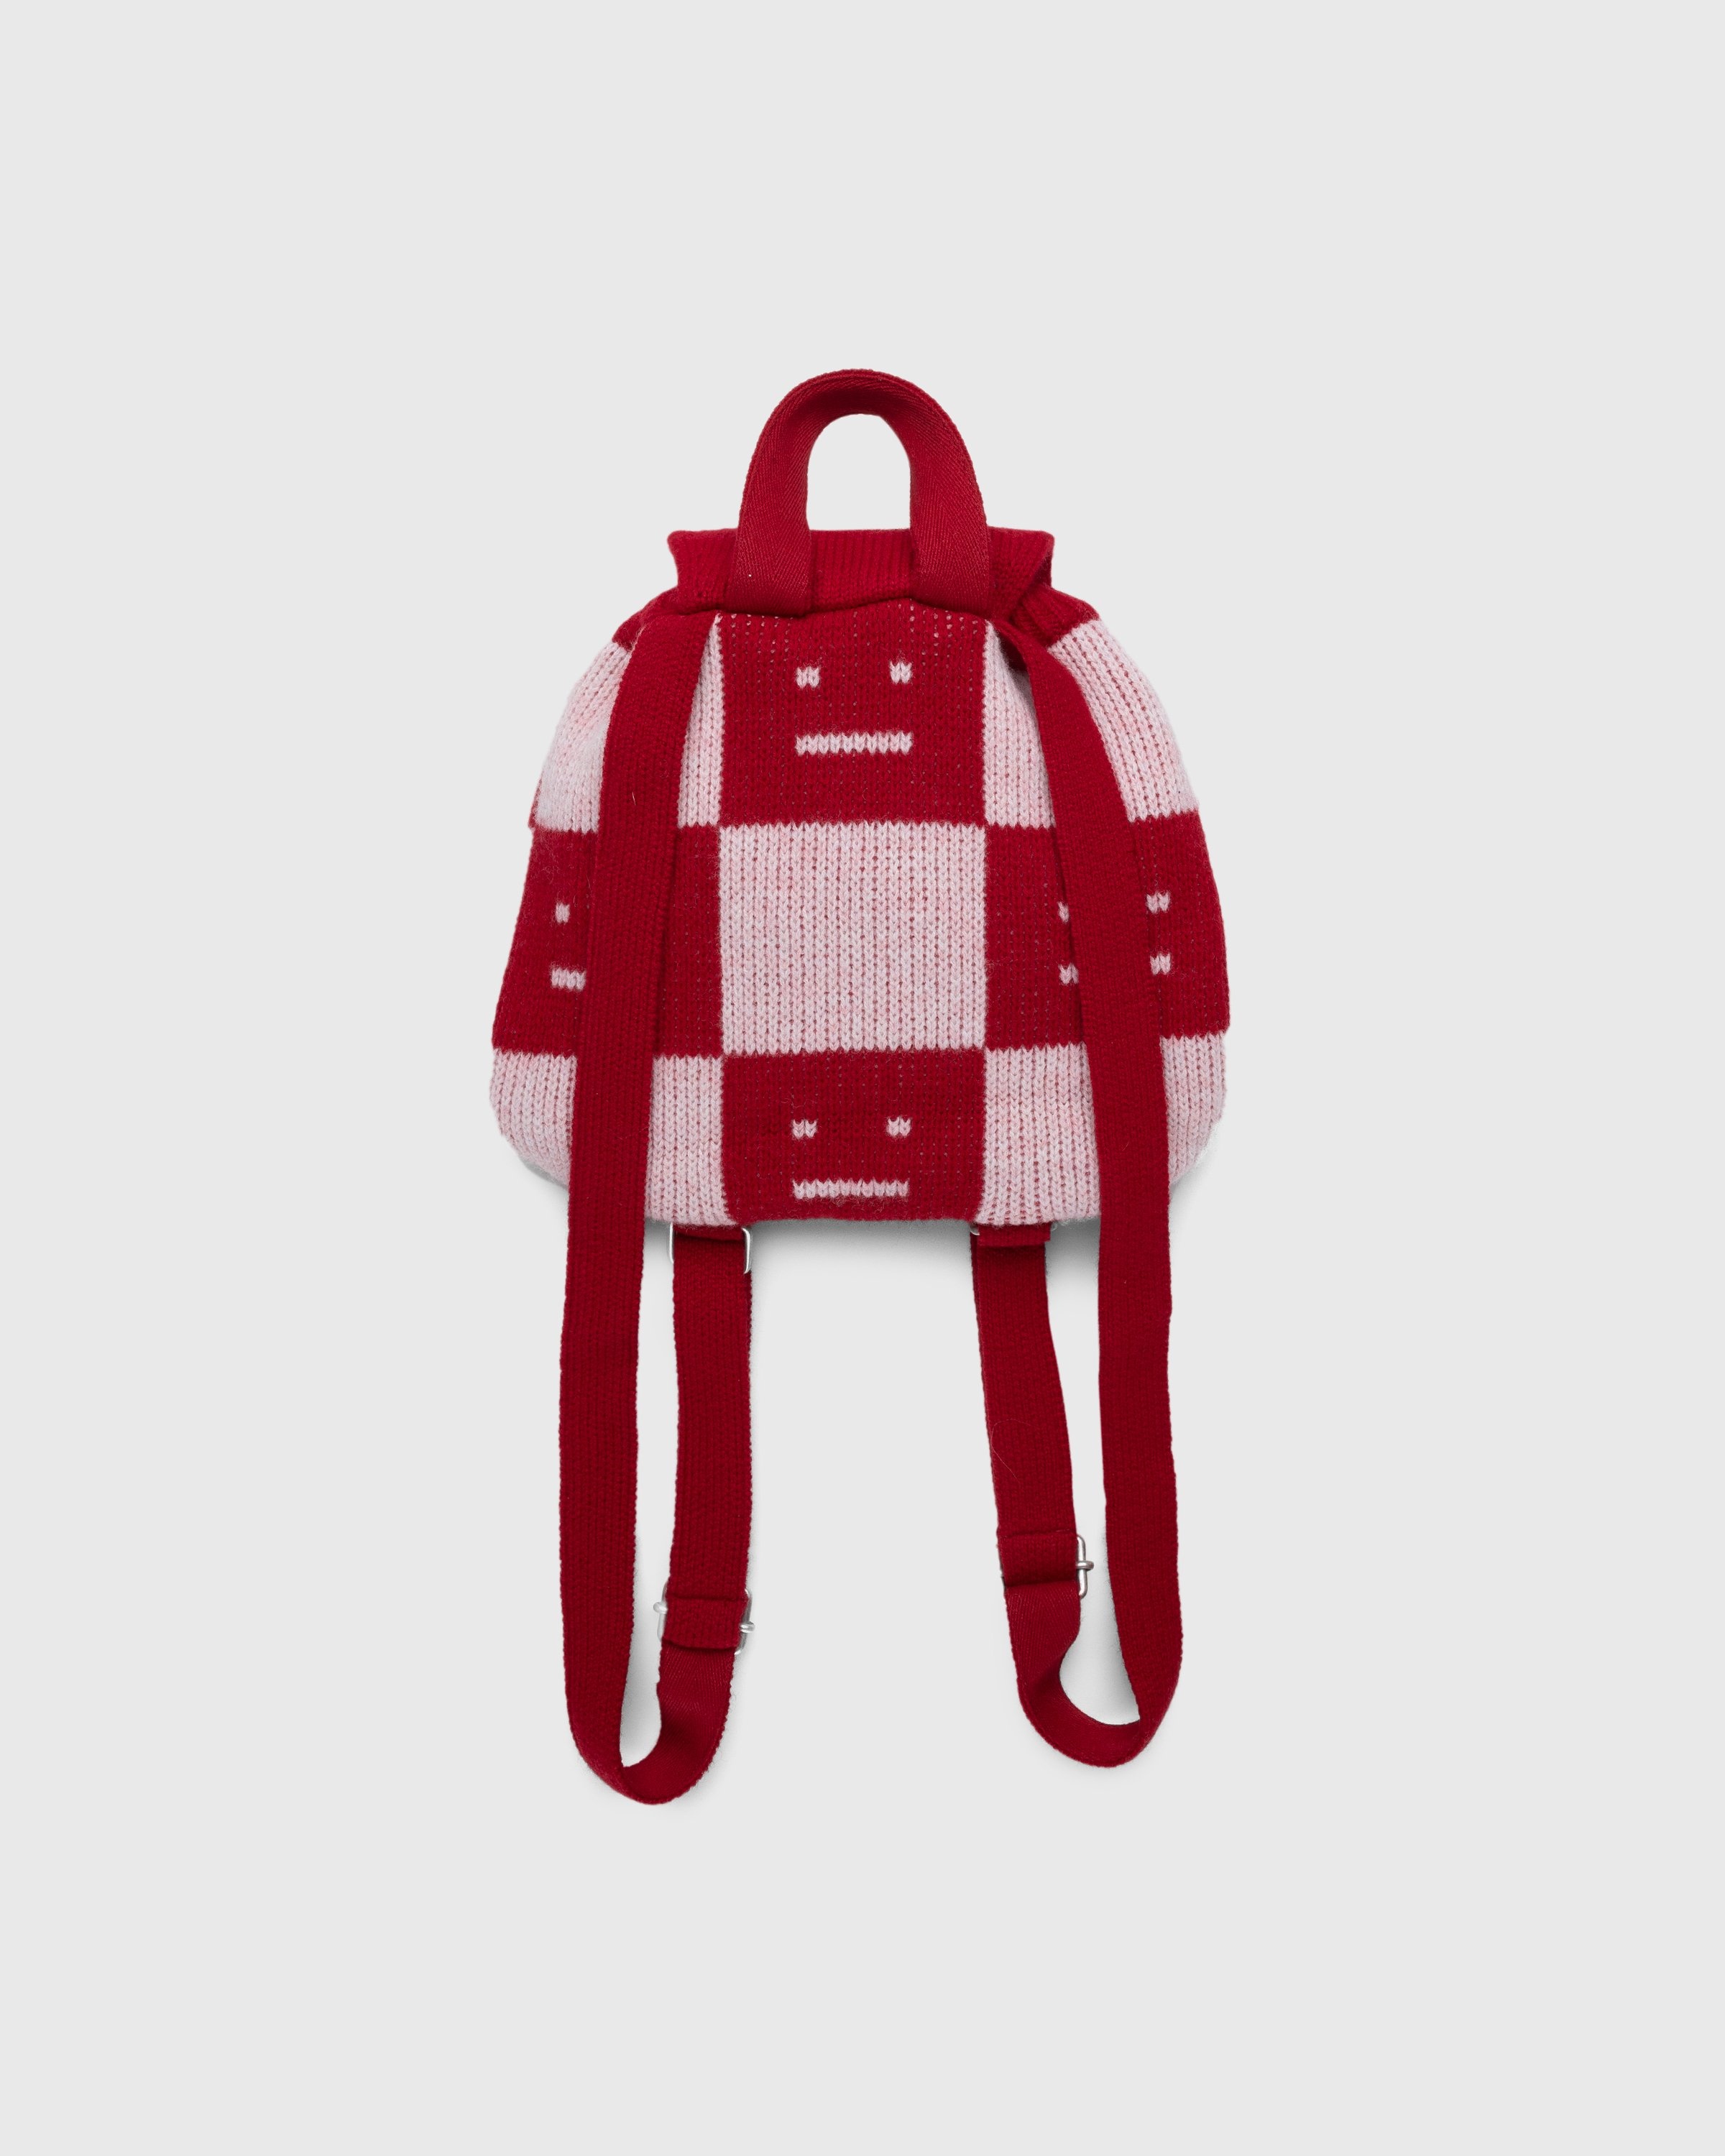 Acne Studios – Knit Face Backpack Deep Red/Faded Pink/Melange - Bags - Red - Image 2